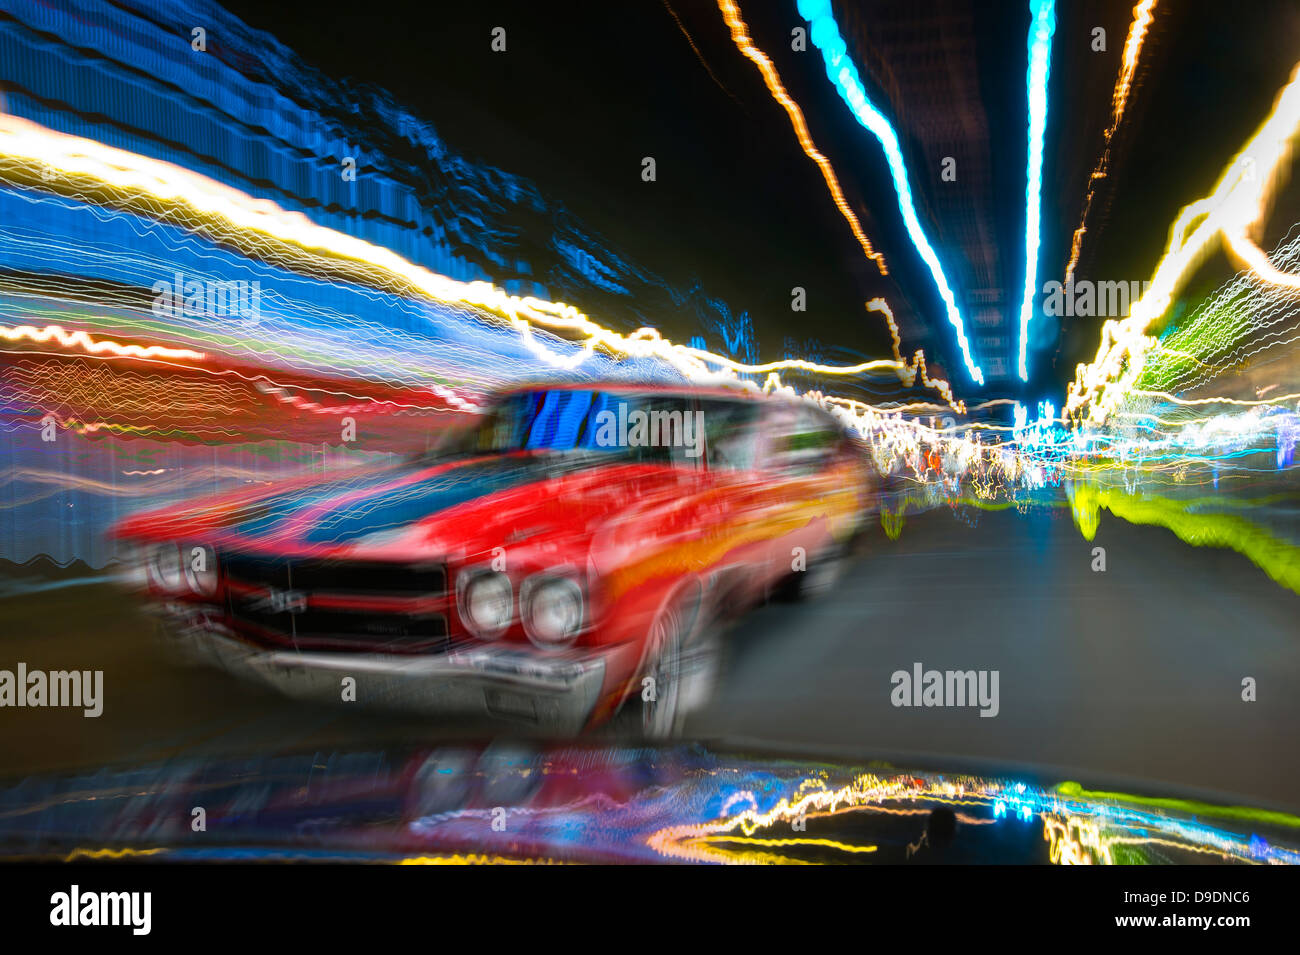 Red Car Moving Through Town At Night Stock Photo